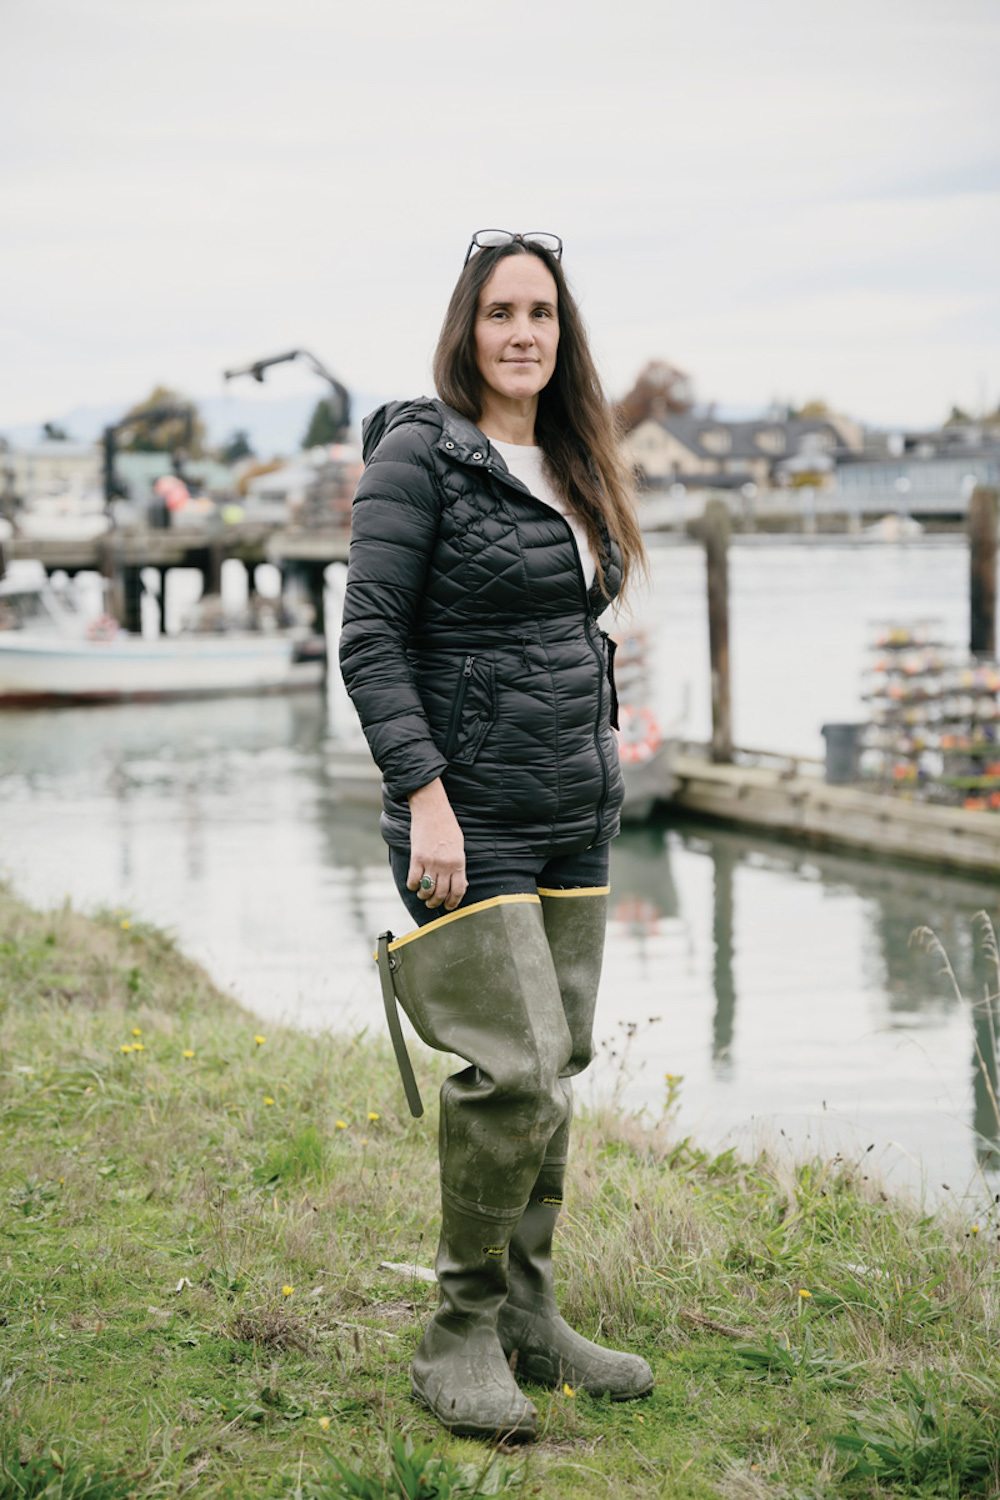 Laura Wilbur (Swinomish), whose grandfather helped build the salmon-processing facility where the Swinomish Shellfish Company is located, now works for the company. 2021